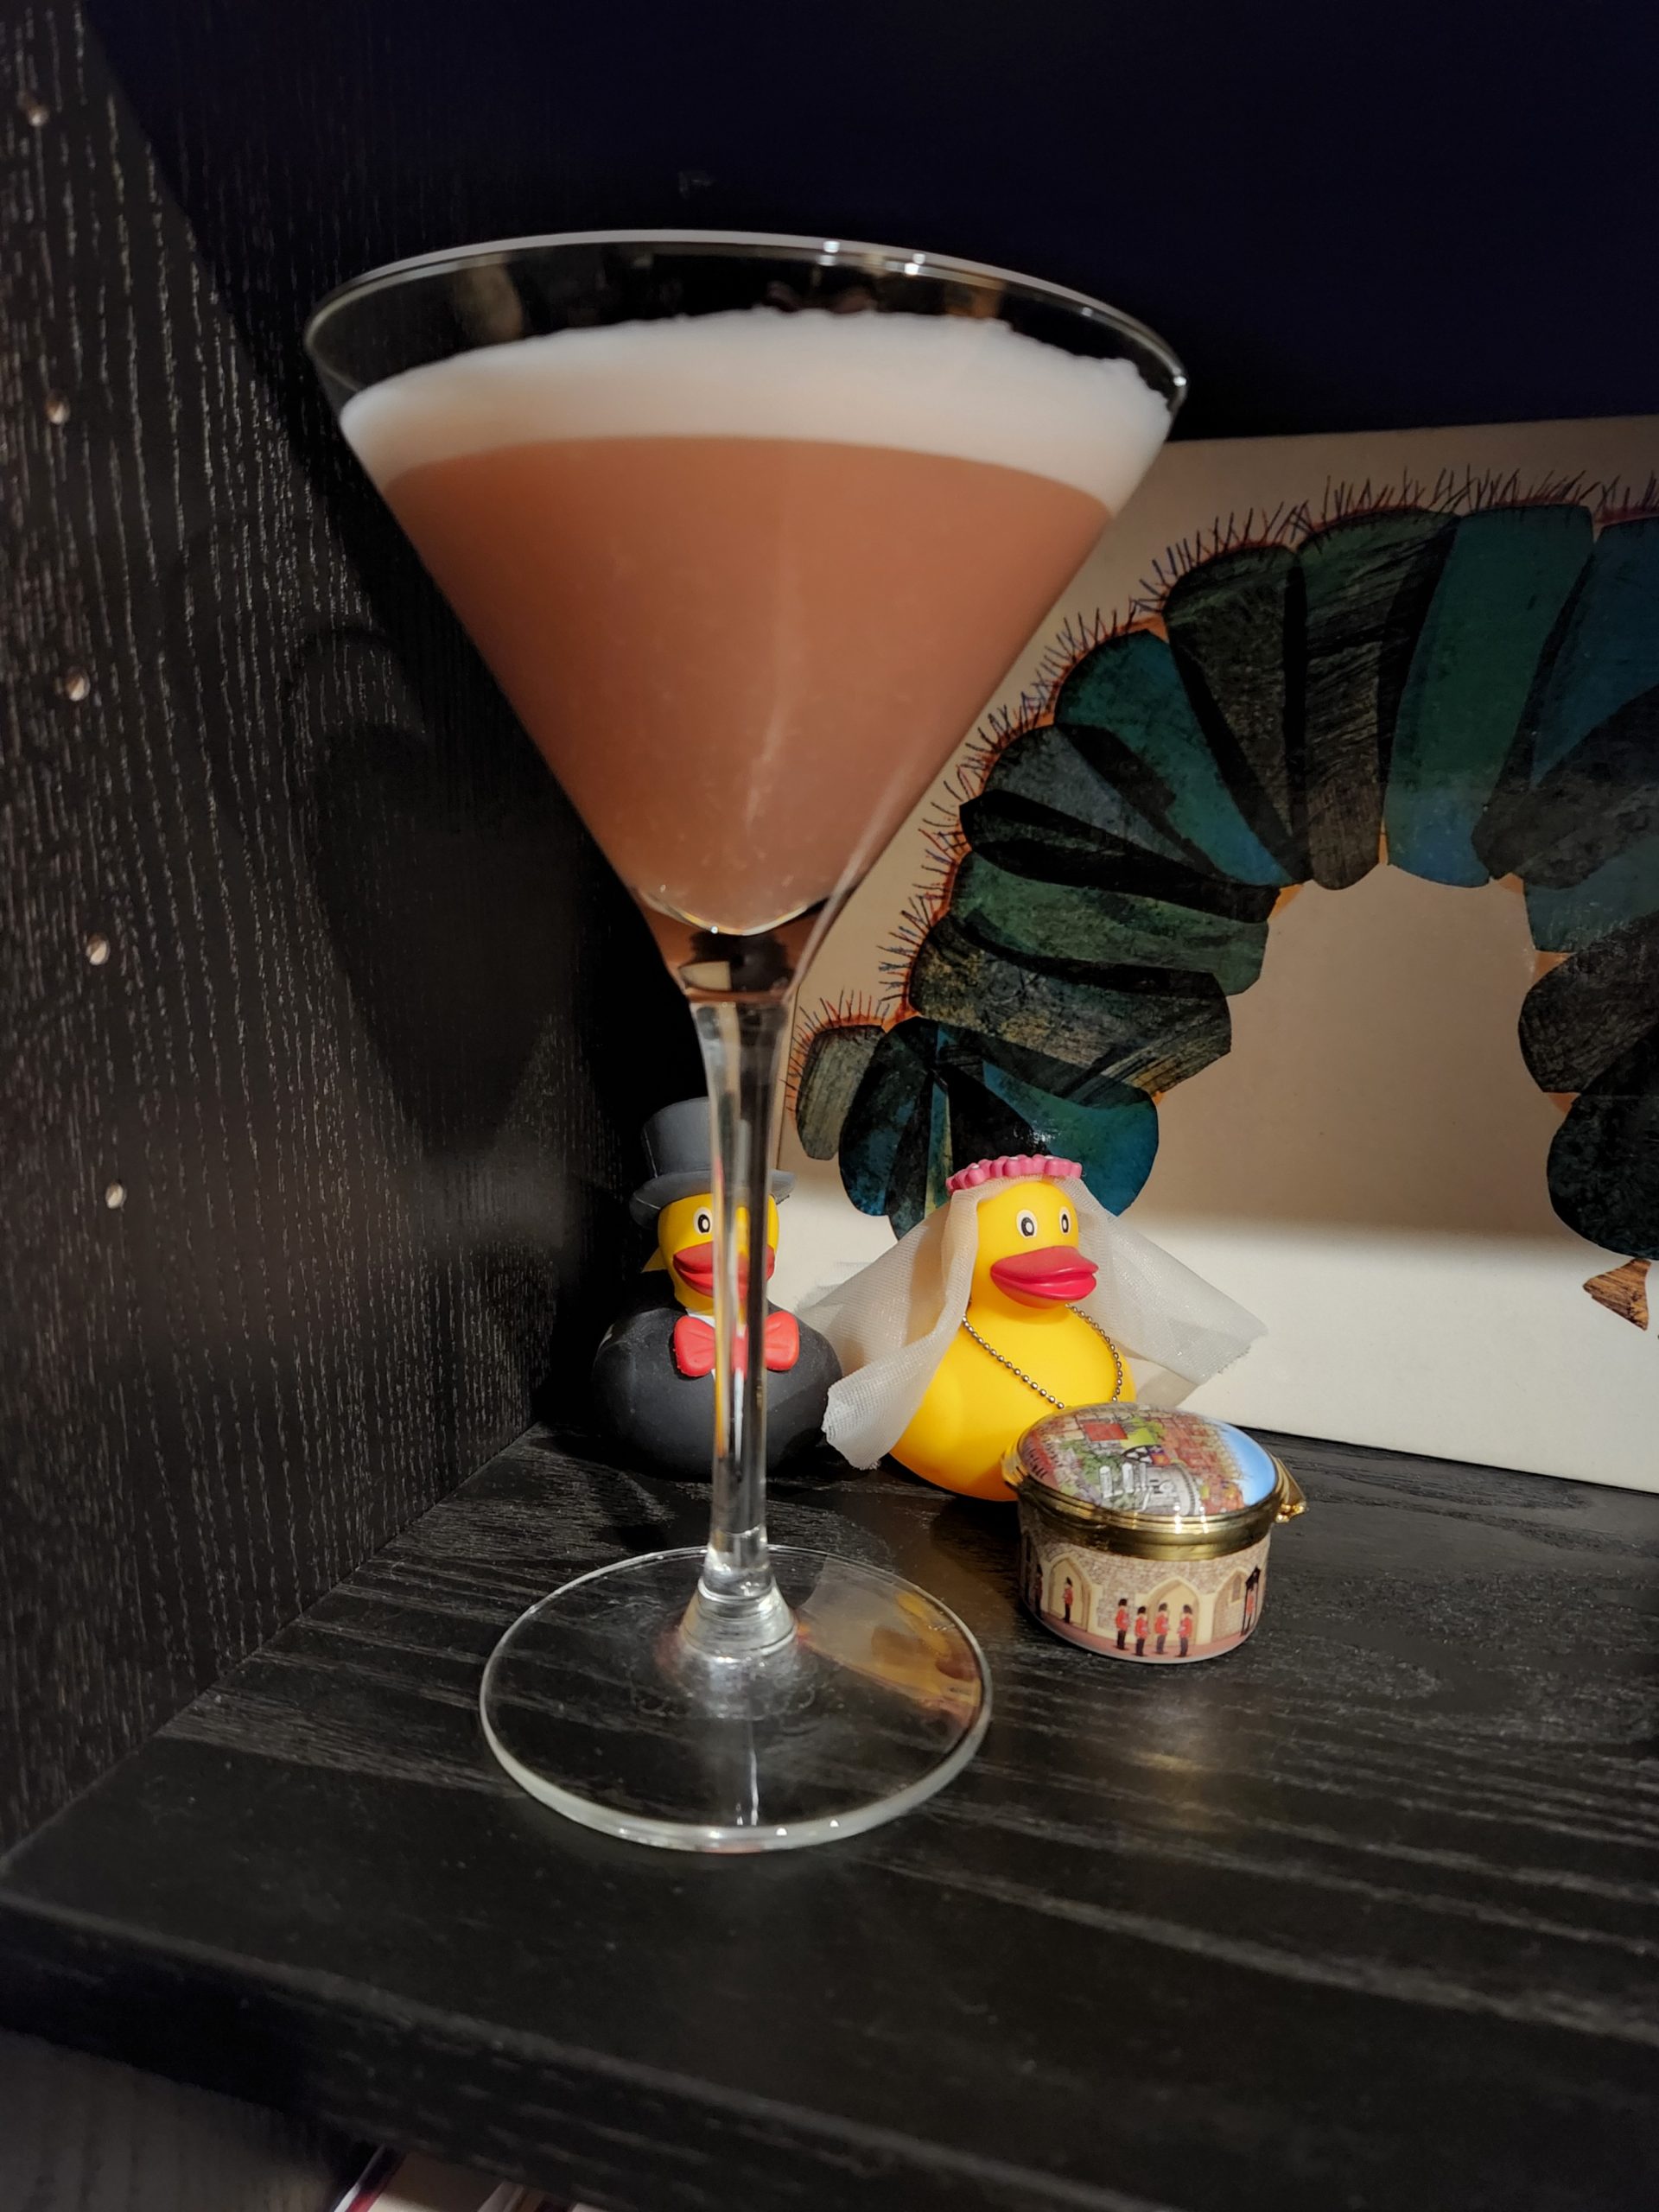 A Million Dollar Cocktail in front of two miniature rubber ducks.